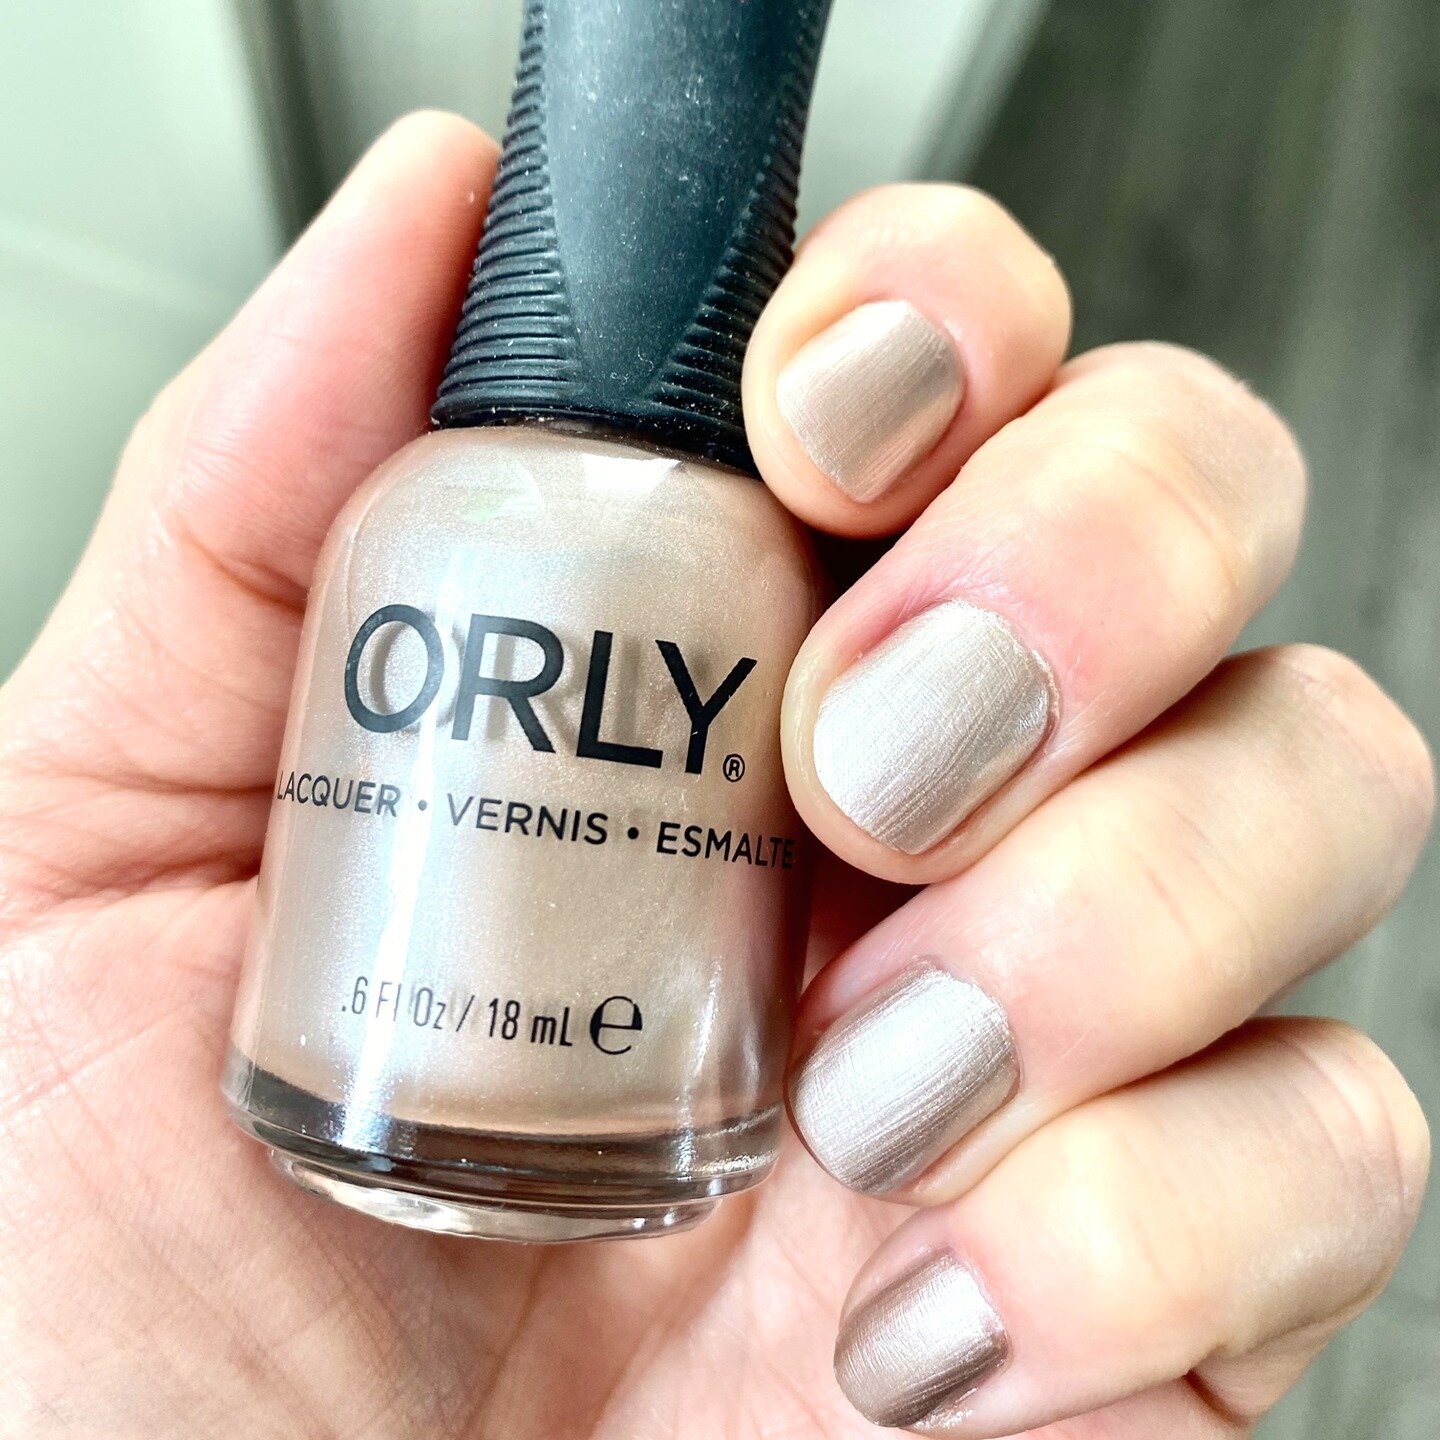 World Vegan Month - Day 4!⁠
Category: Vegan Beauty⁠
⁠
💅 Did you know that many nail polishes are NOT vegan?! ⁠
⁠
Non-vegan nail polishes can contain fish scales for a &ldquo;pearl&rdquo; effect (guanine), coloring from drying and crushing insects (c